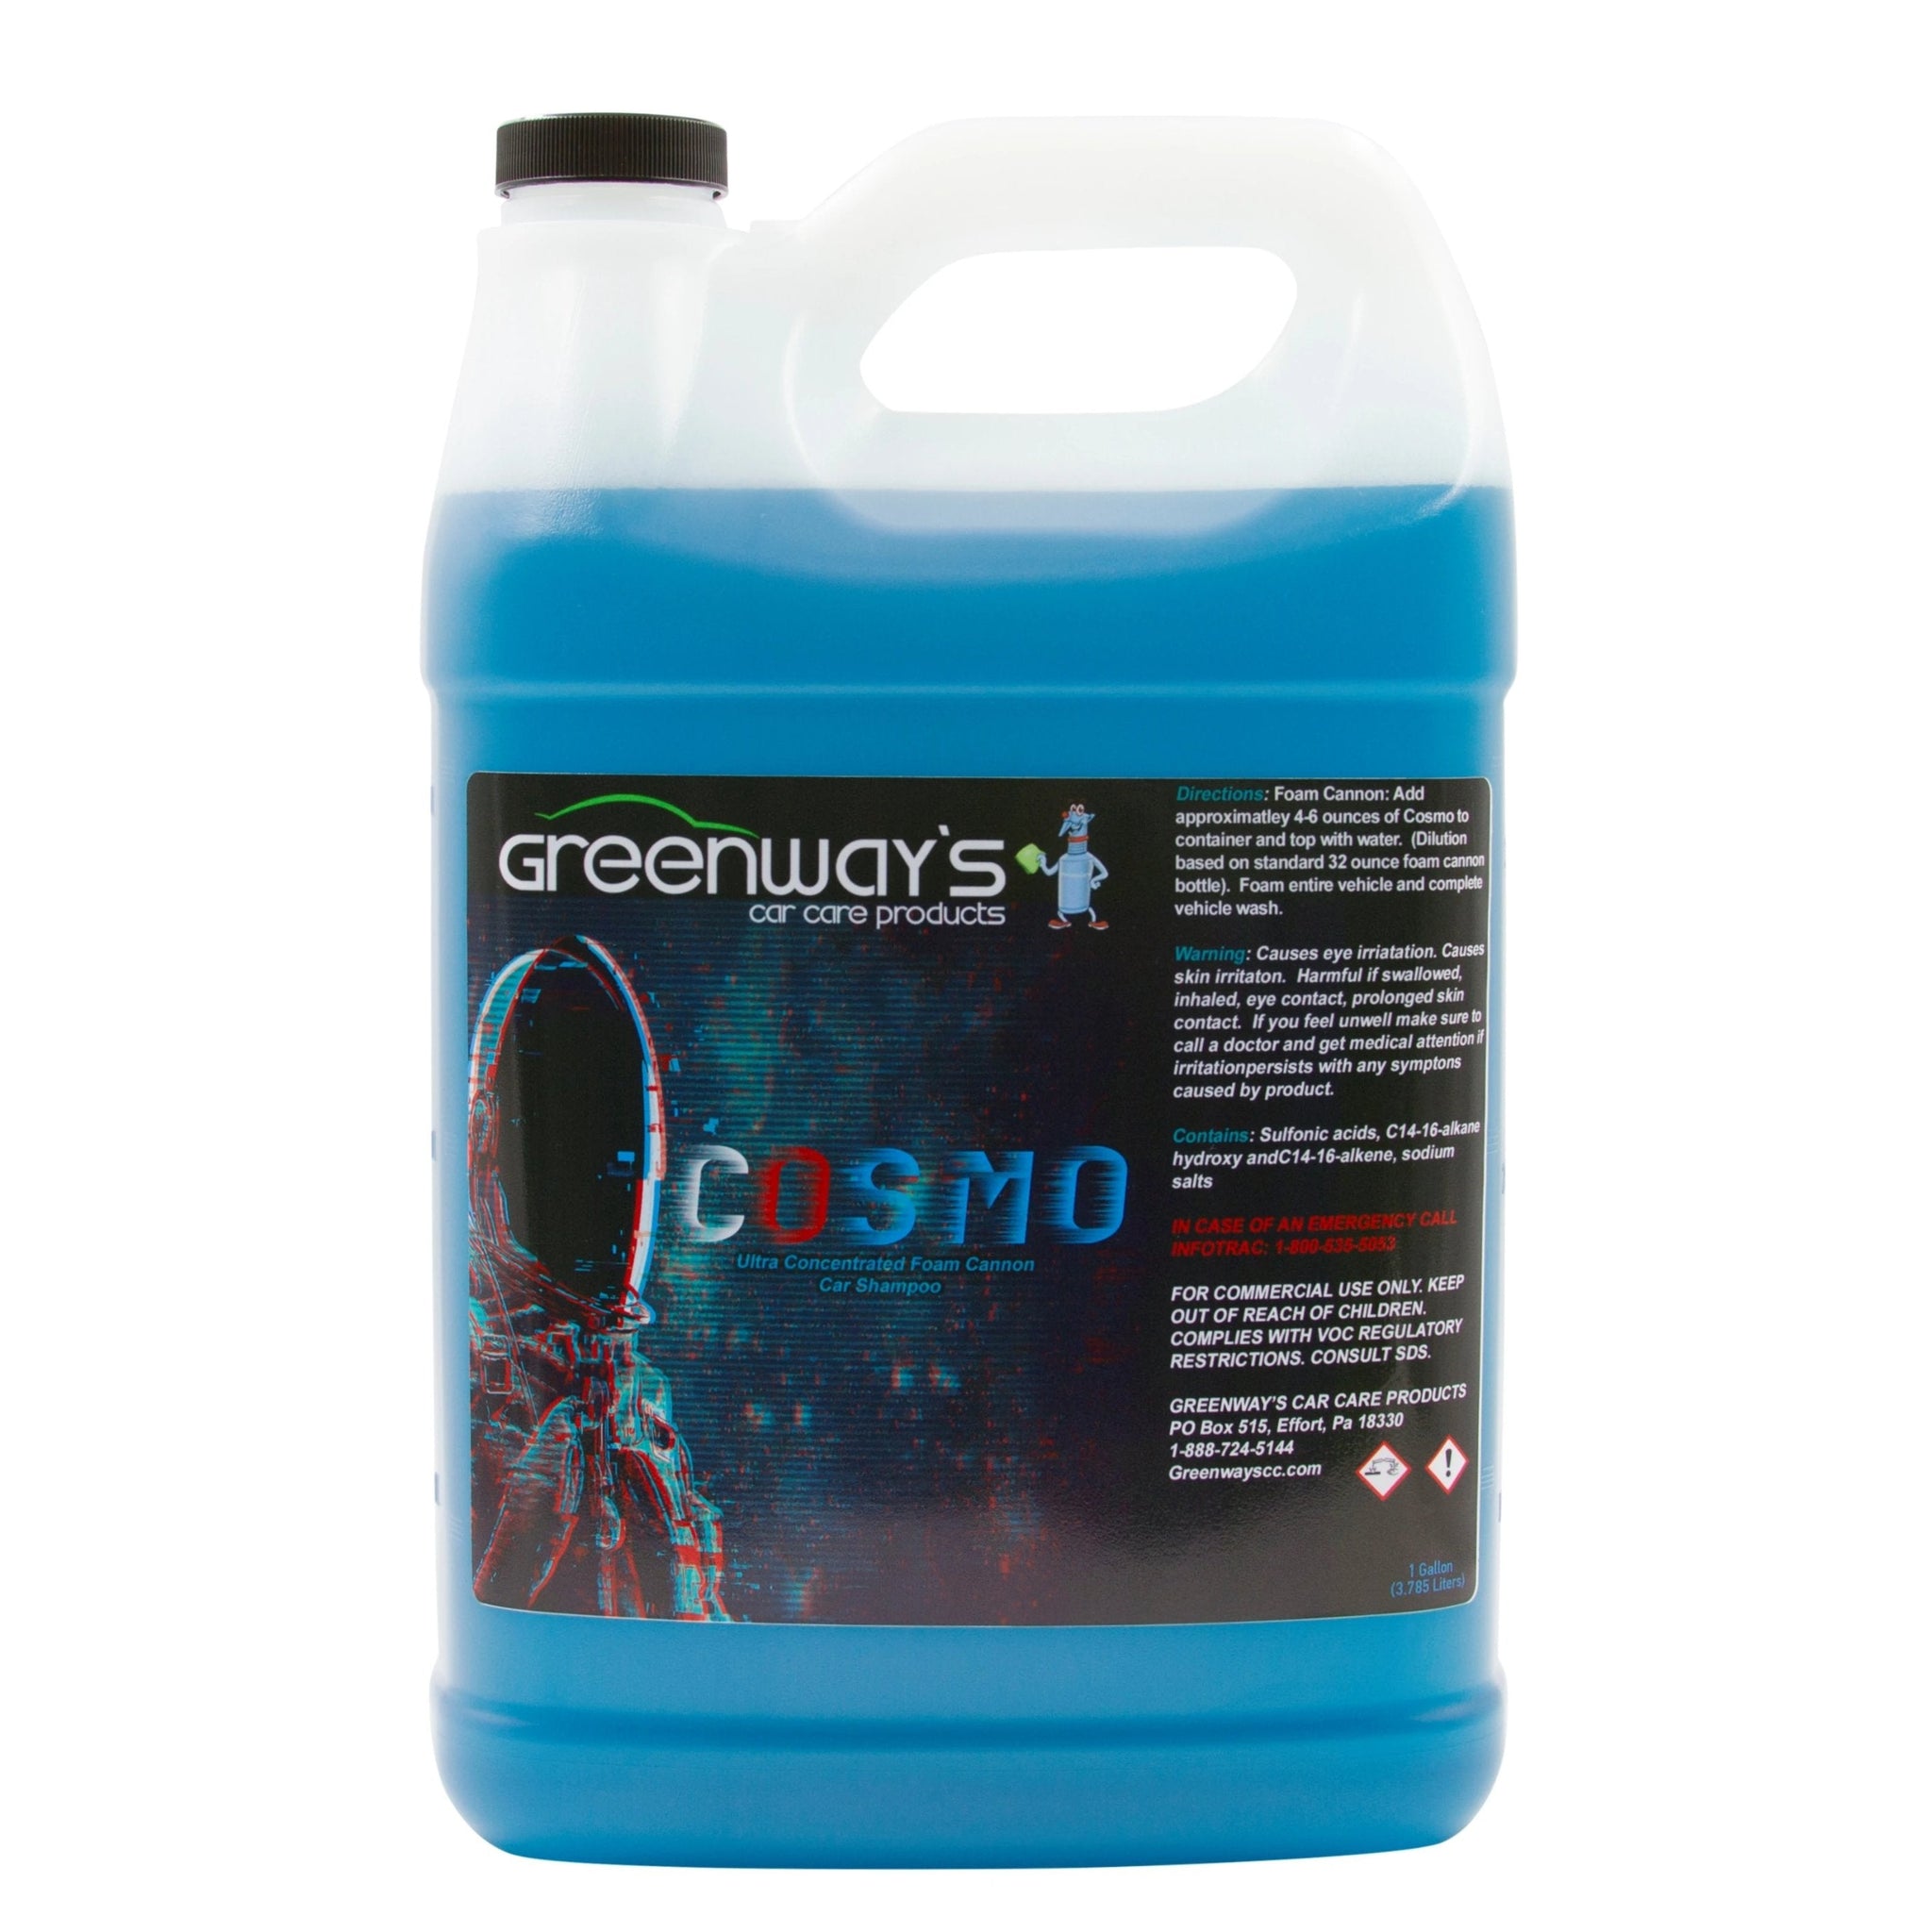 Greenway’s Car Care Products, Cosmo, ultra-concentrated, pH neutral, low or high-pressure foam cannon car shampoo, 1 gallon.